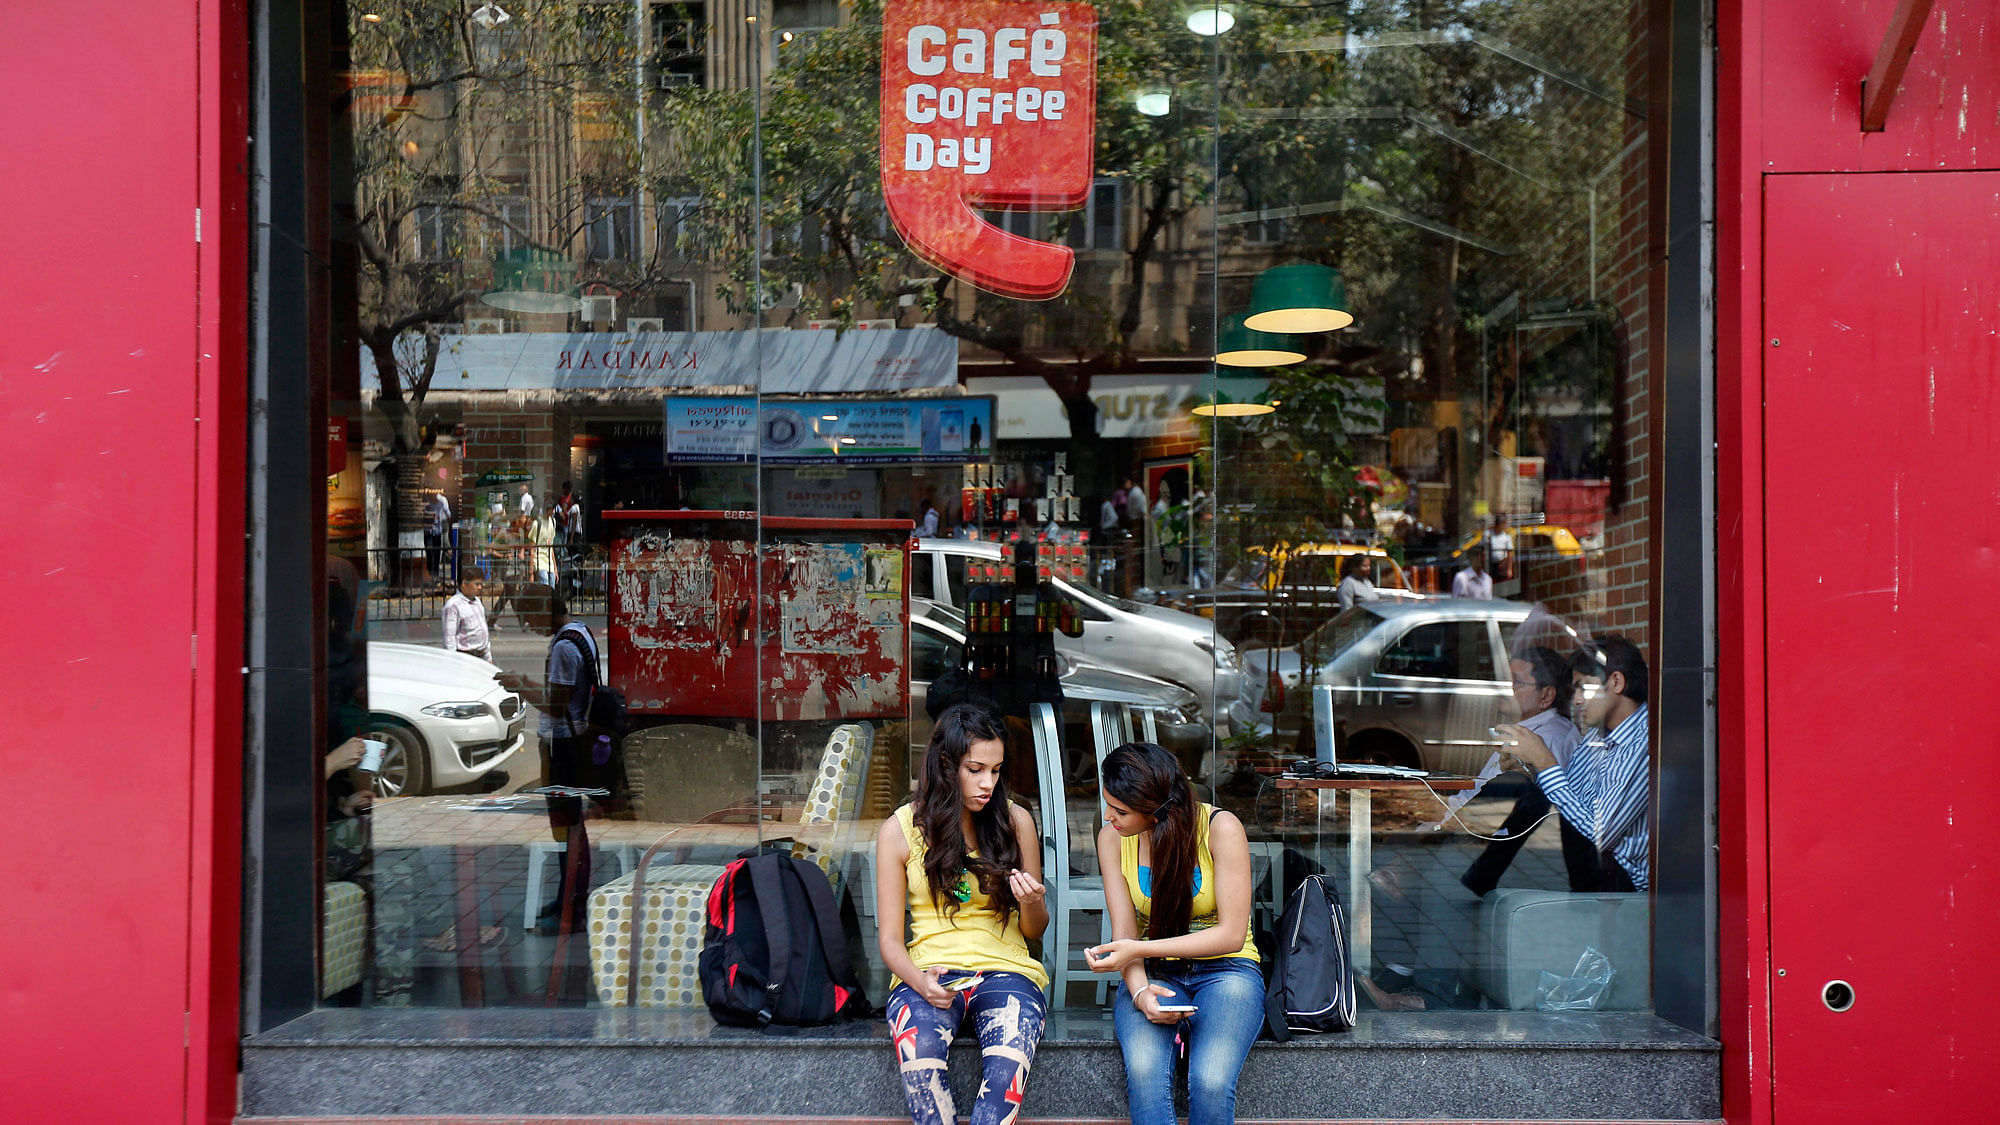 Coffee Day Enterprises is looking to raise Rs 1,150 crore through an initial public offering of Cafe Coffee Day. (Photo: Reuters)